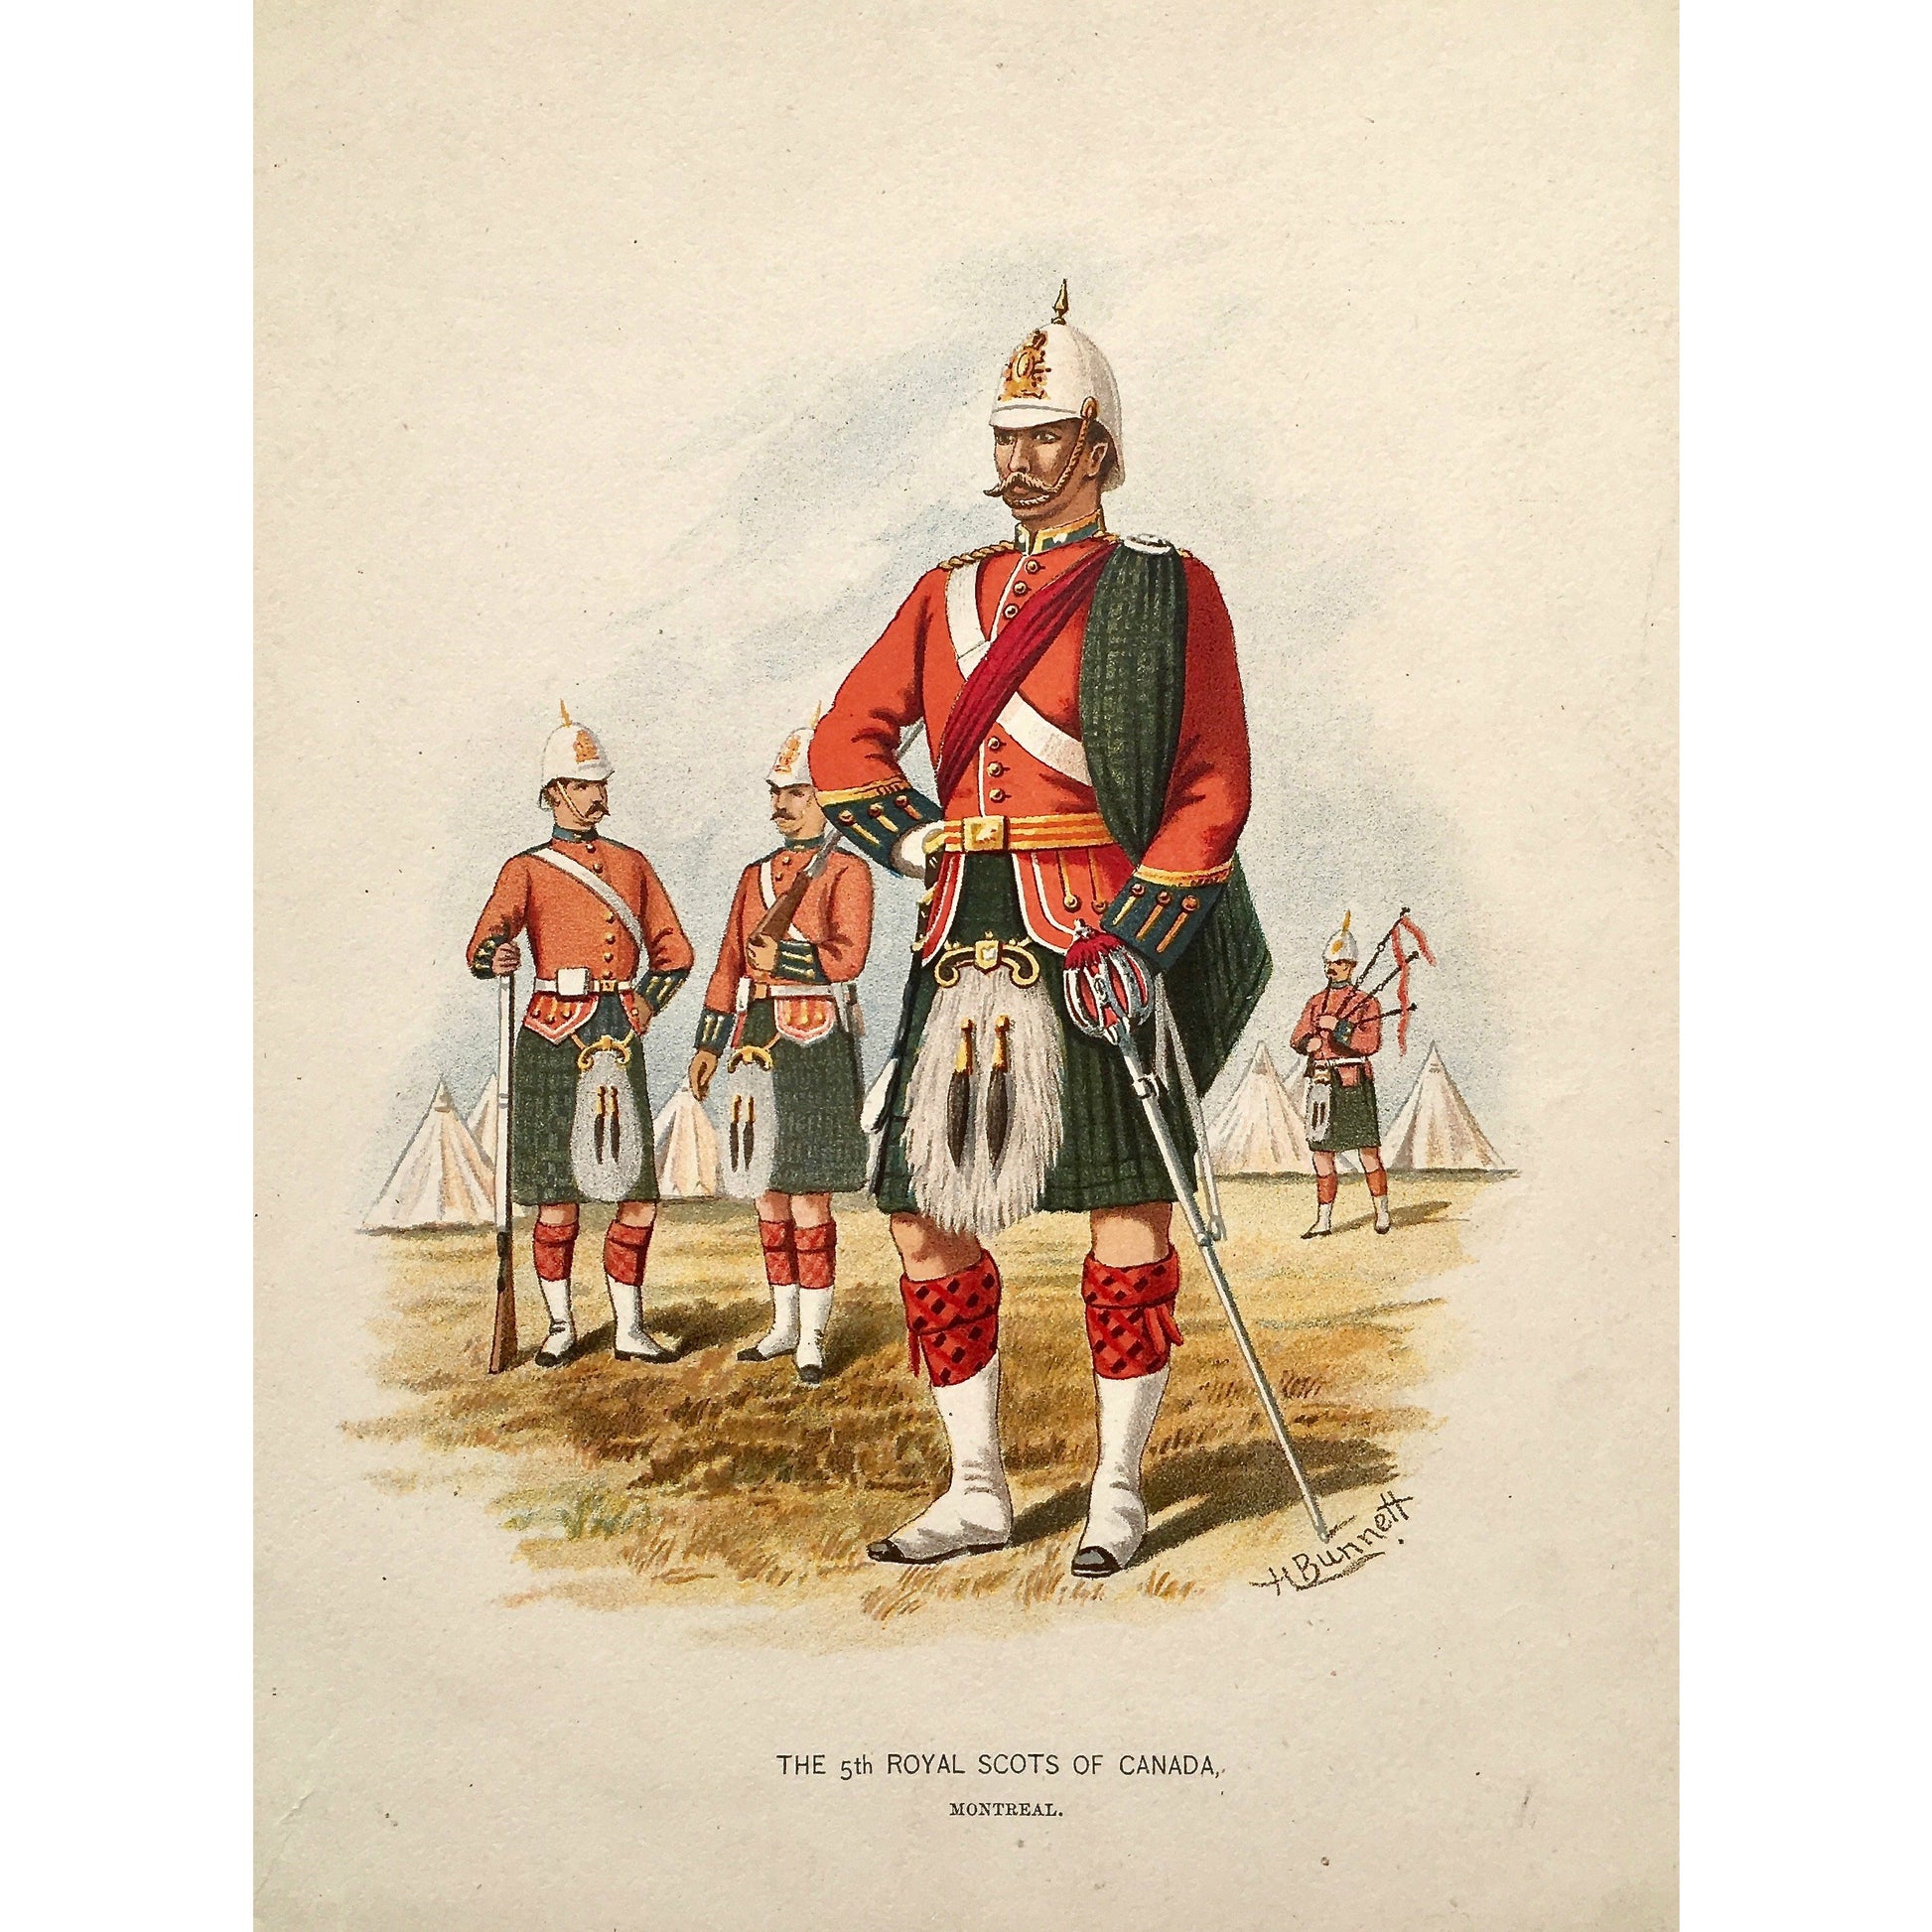 The 5th Royal Scots of Canada, Scots, Royal Scots, Scottish, Scotland, Kilts, bagpipes, Montreal, Canada, Artillery, Military, Military Costume, Horses, Riding, Costume, Uniform, Her Majesty's Army, Regiments, Queen's Forces, H. Bunnett, Bunnett, Sword, Army, London, 1890, Military Prints, Canadian, Canadian Military, Canadian Army, Armed Forces, Military Uniform, Chromolithograph, J. S. Virtue & Co., Antique, Prints, Original, Office Art, Interior design, Interior decorating, Decor, Design, Art, Home decor